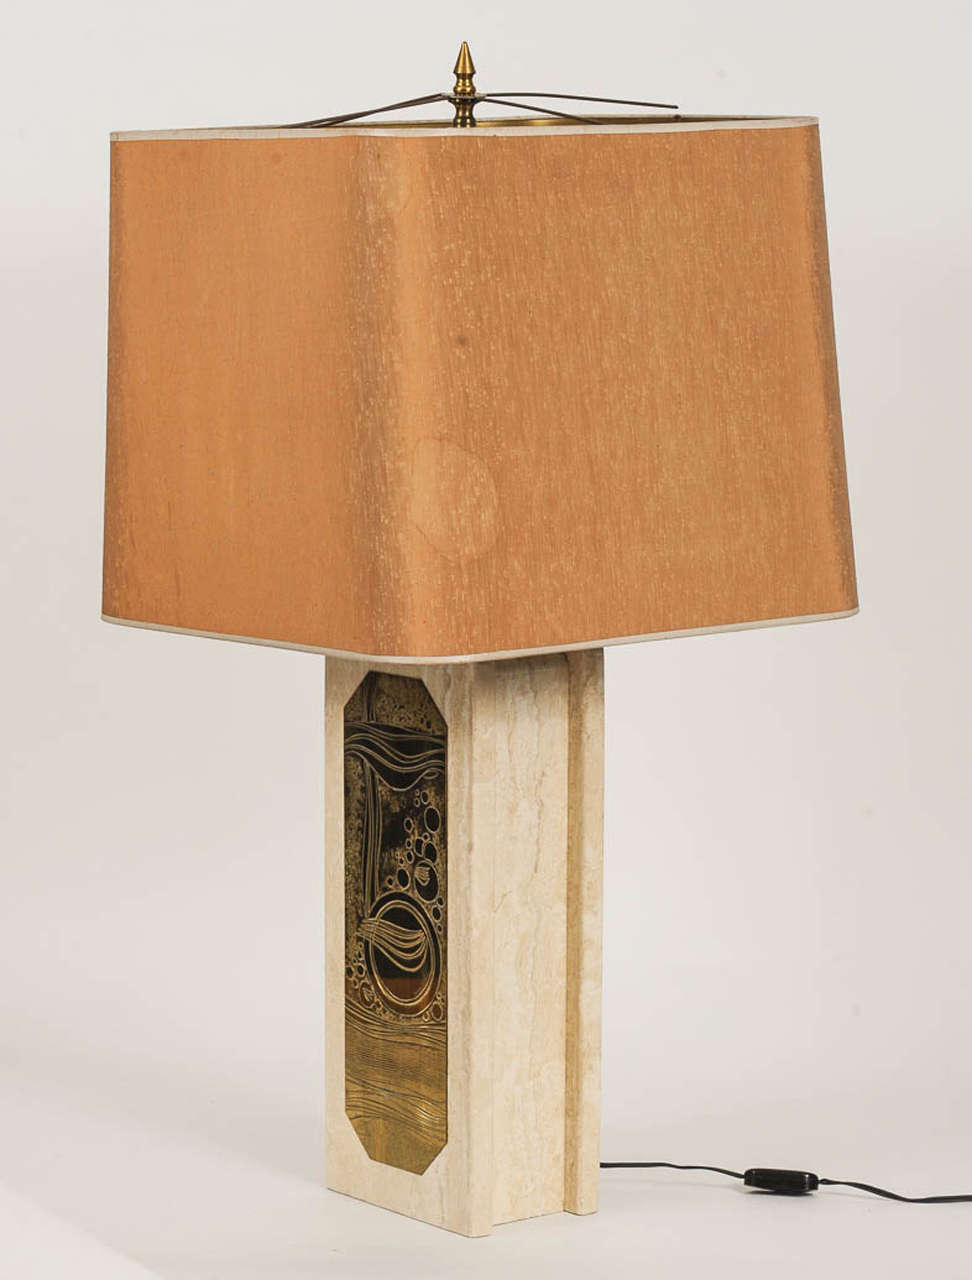 Beige marbled table lamp by Belgian artist Georges Mathias with etched brass plaque.
Signed Georges Mathias.